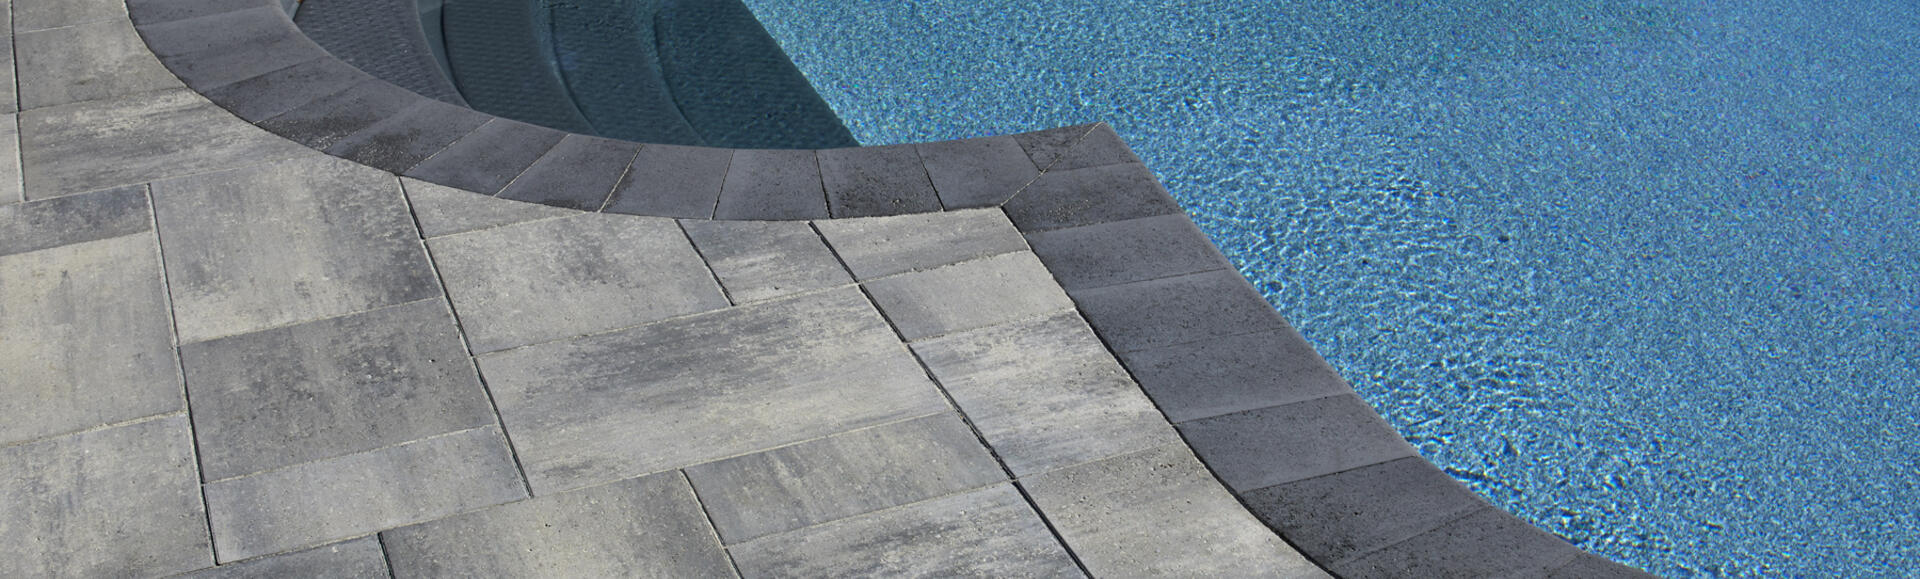 Pool and patio pavers using Nueva Slab and Cassina Coping products from Brampton Brick